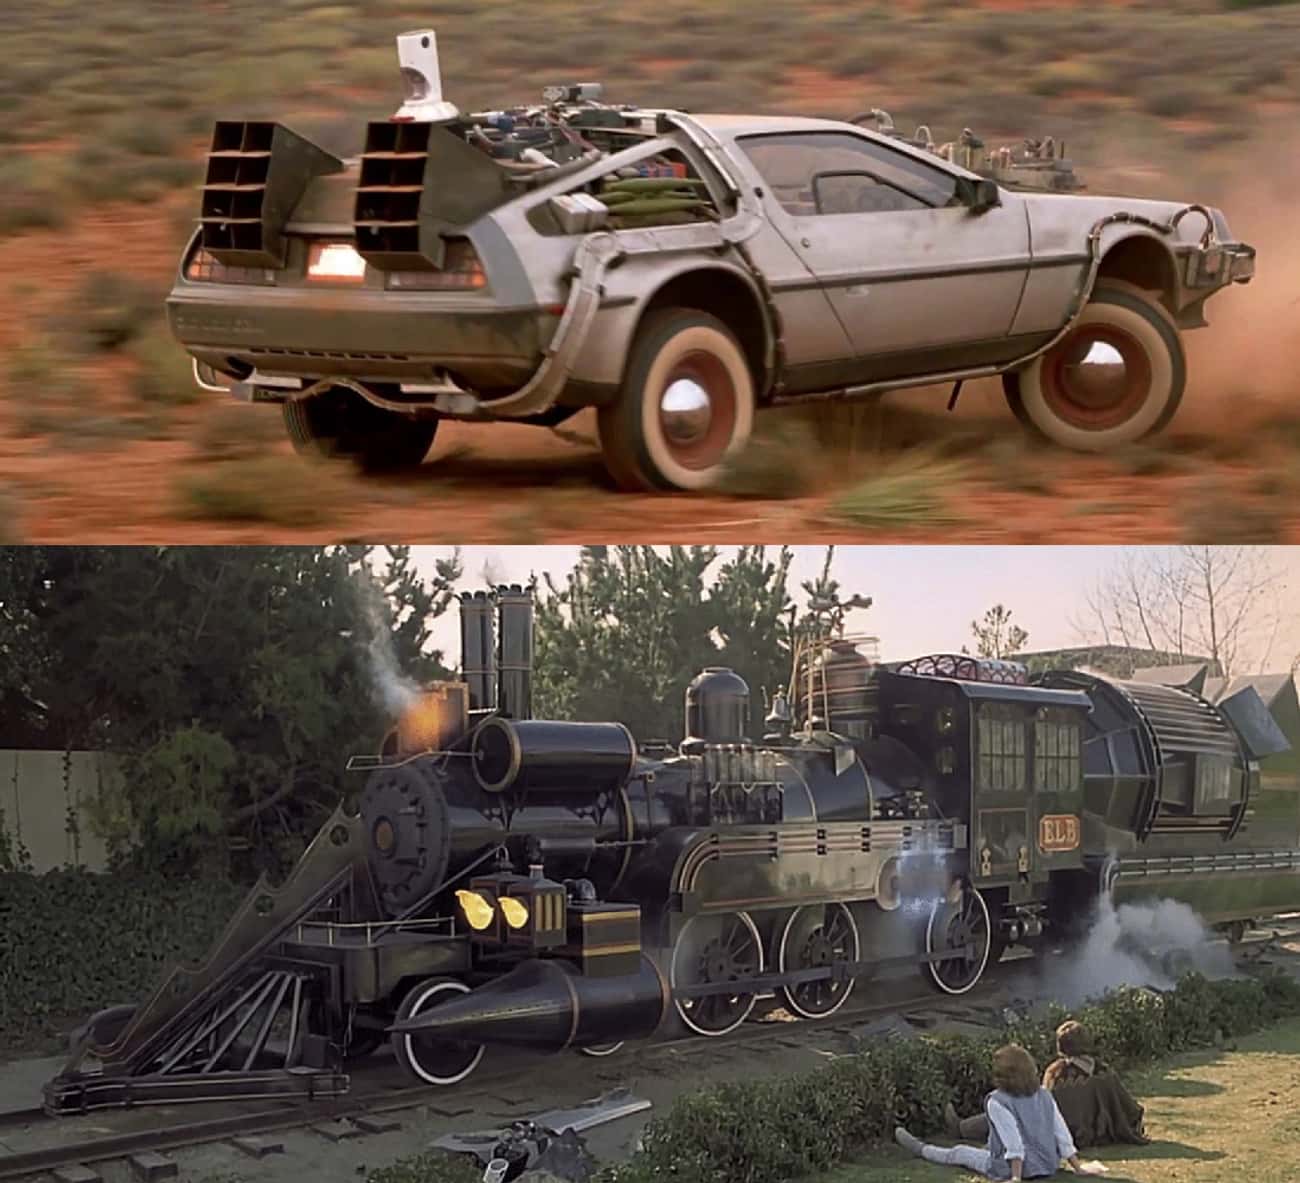 Doc's Time Machine Train In 'Back To The Future Part III' Also Has White Wall Tires